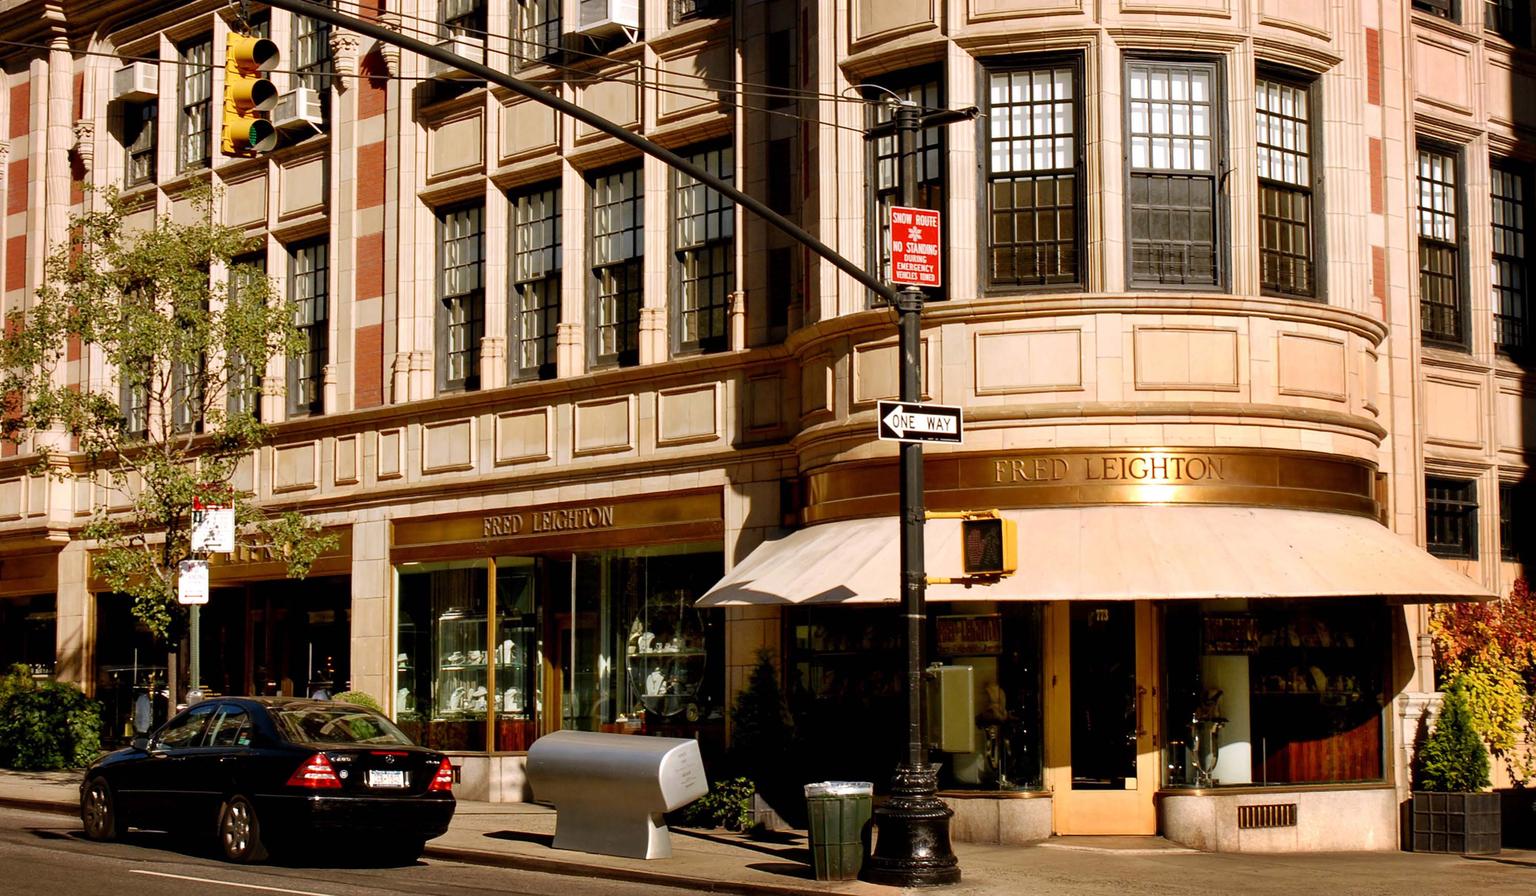 The largest emporium of antique and estate jewelry in New York is Fred Leighton, which started out in Manhattan's Greenwich Village before moving uptown to Madison Avenue in 1984.